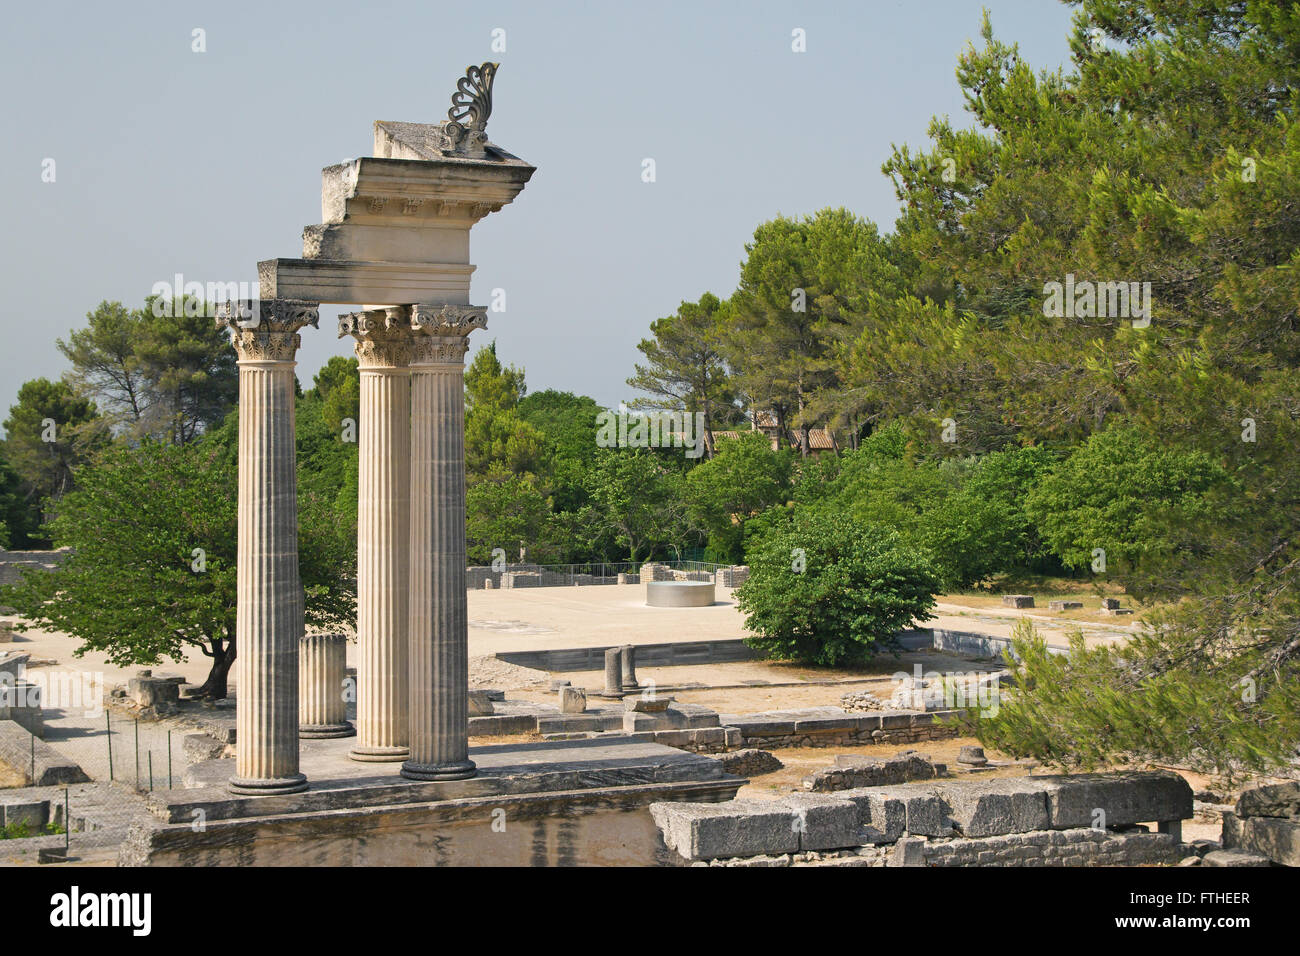 Glanum was an oppidum founded by a Celto-Ligurian people in the 6th century BCE. Stock Photo